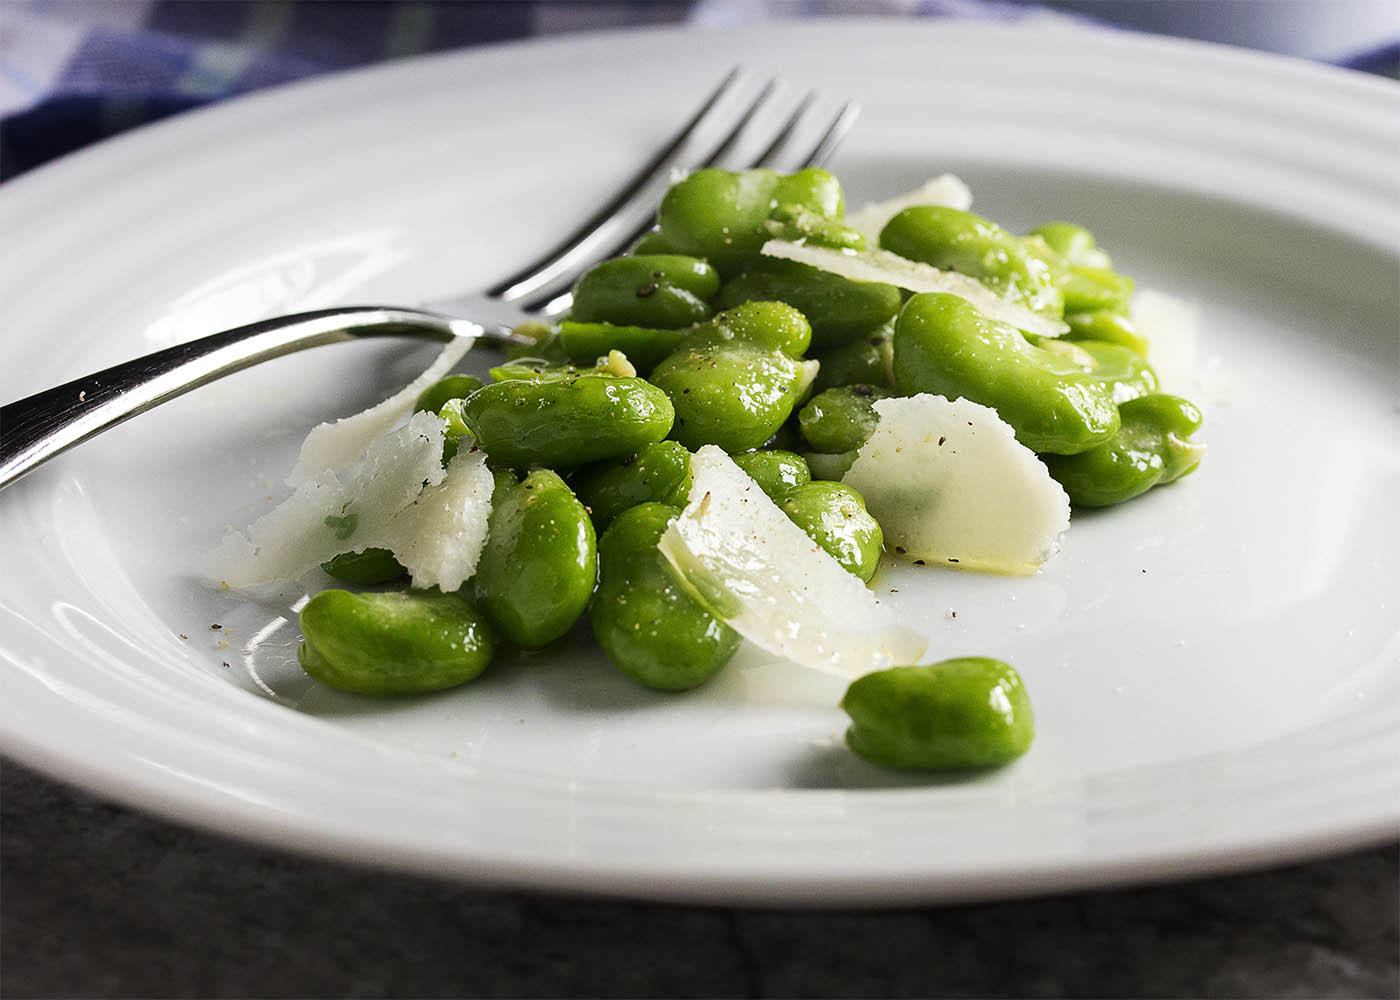 One great way to enjoy fava beans is in this healthy spring inspired fresh fava bean and parmesan salad, which is tossed lightly with a little olive oil and sprinkled with salt and pepper. Simple, but oh so good! | justalittlebitofbacon.com